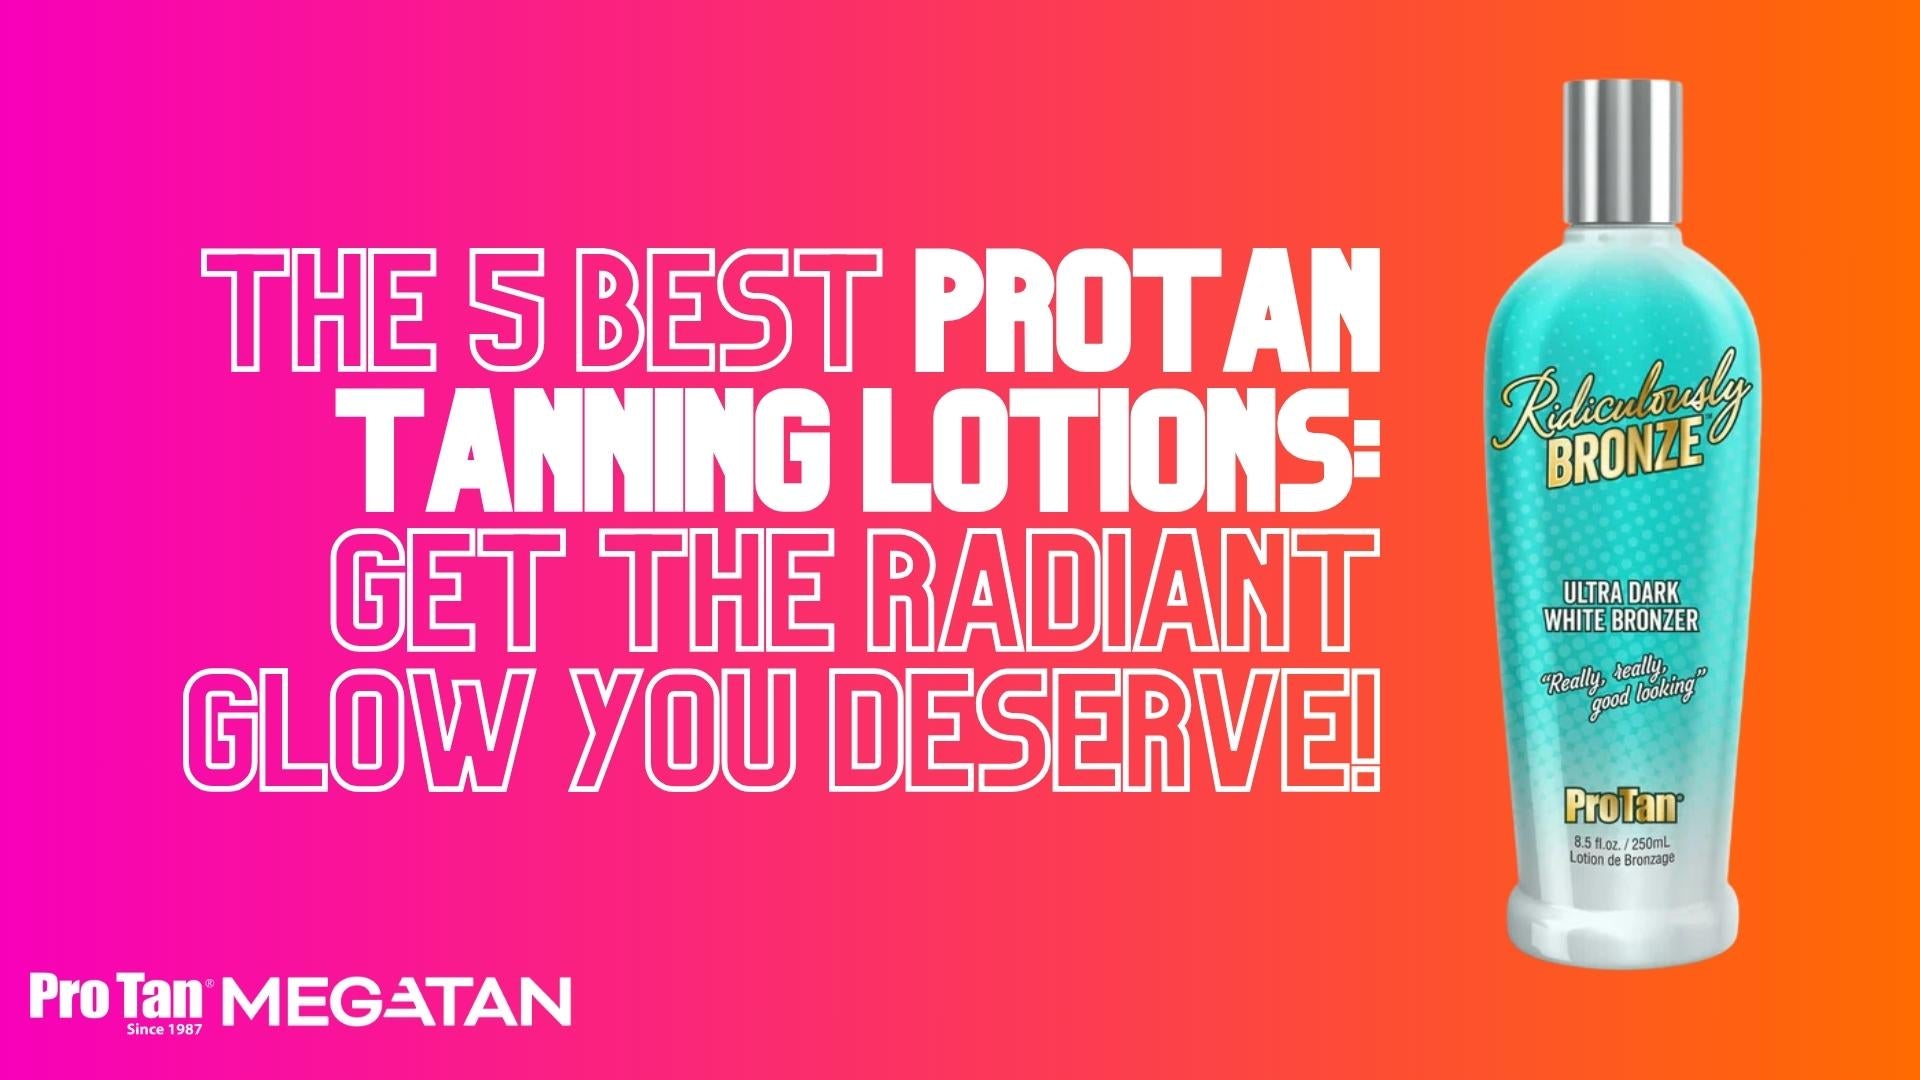 The 5 Best ProTan Tanning Lotions: Get the Radiant Glow You Deserve!